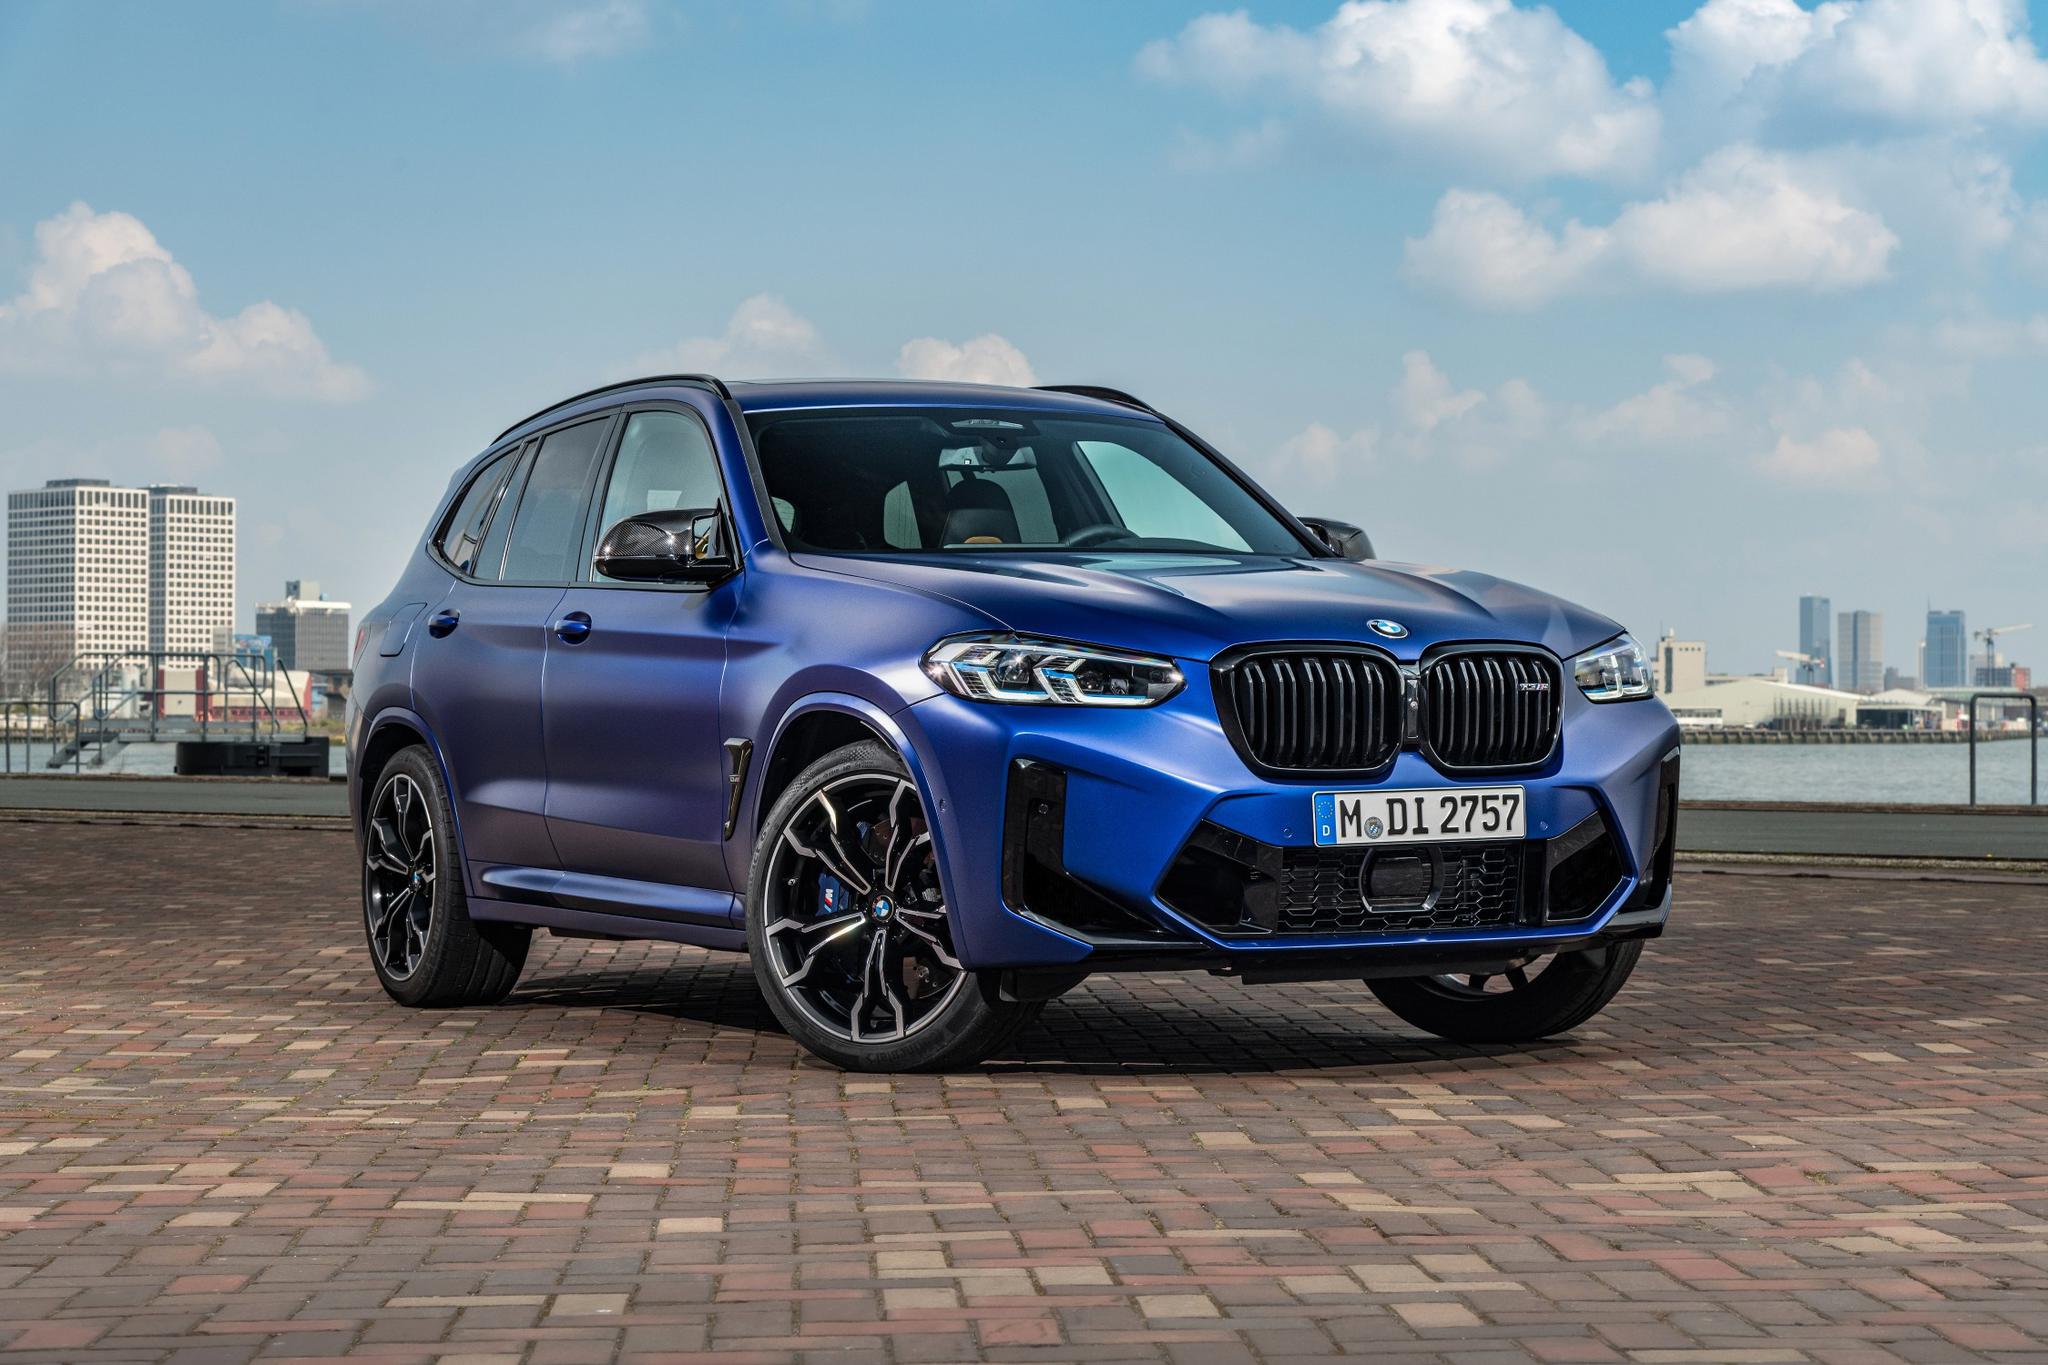 The face-lifted BMW X3 M Competition looks menacing